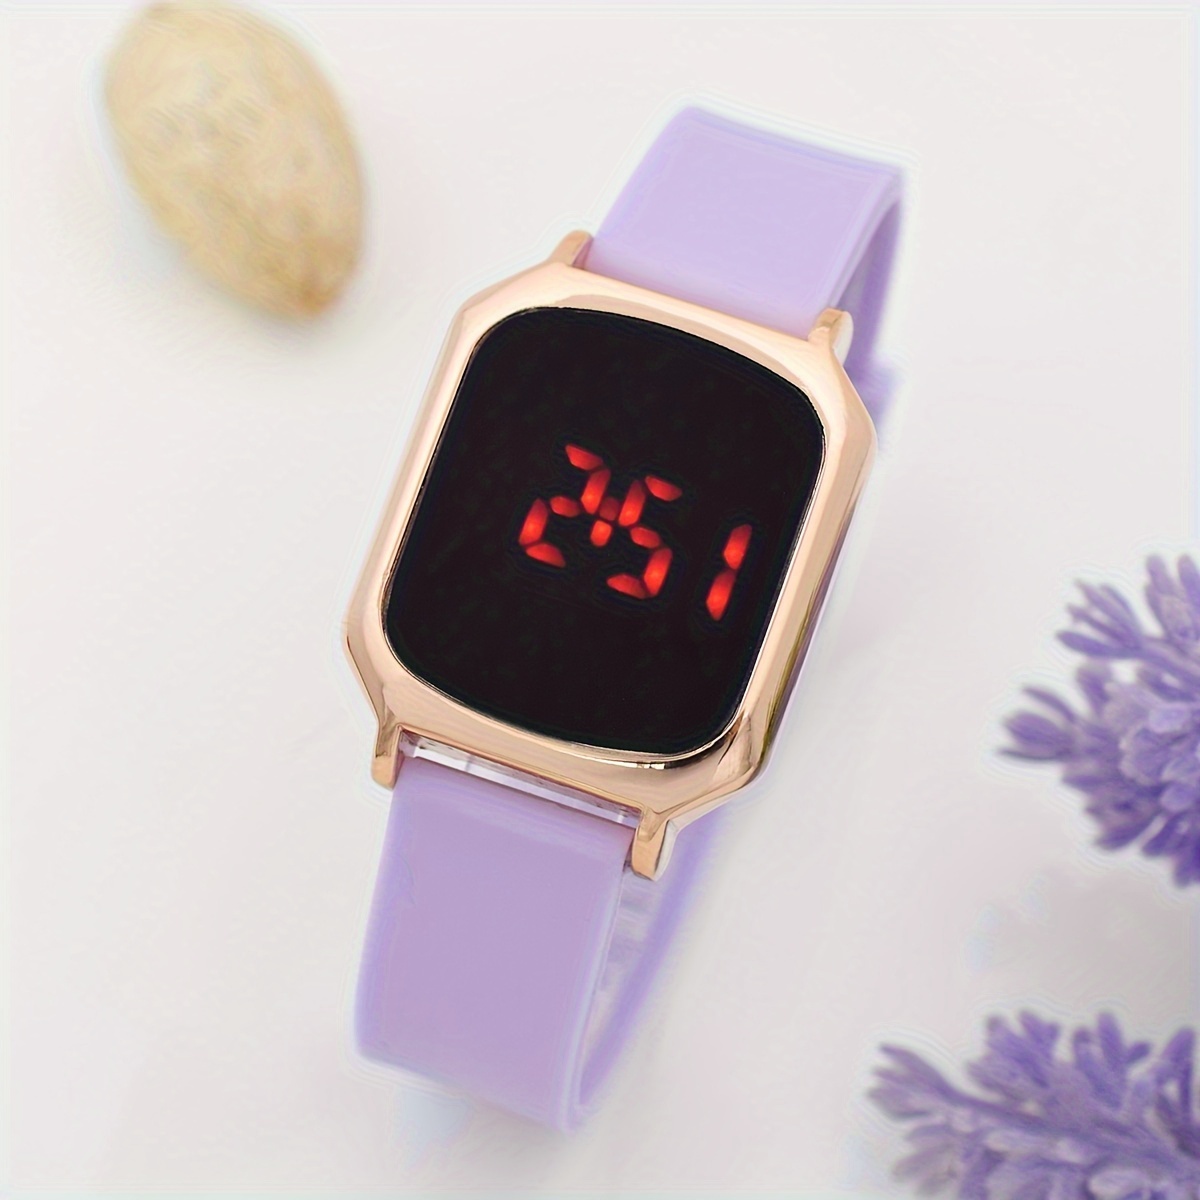 Women's Wrist Watches Led Display Digital Watch For Women Sport Waterproof  Soft Silicone Electronic Watches Women Fitness Watch